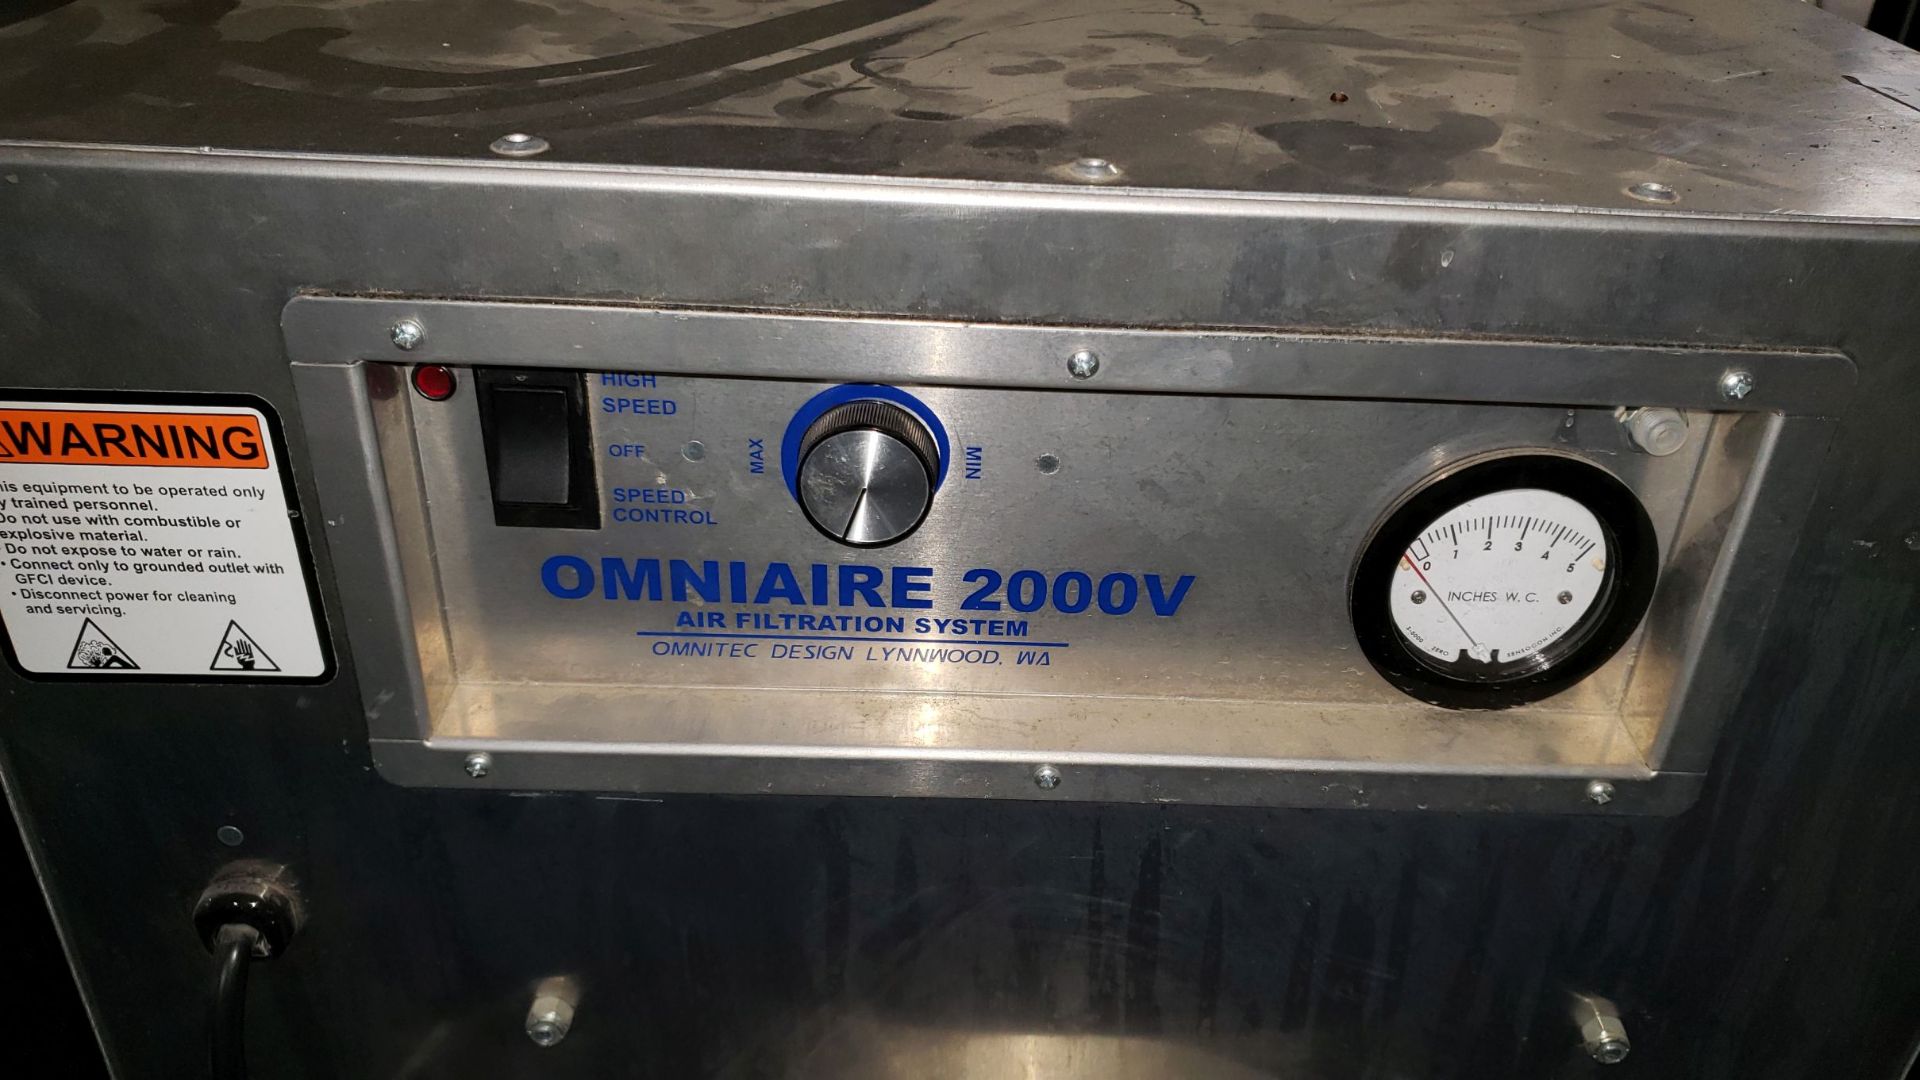 Omniaire indoor air filtration unit, model OA2000V, capable of 300-1900 cfm, aluminum construction, - Image 2 of 6